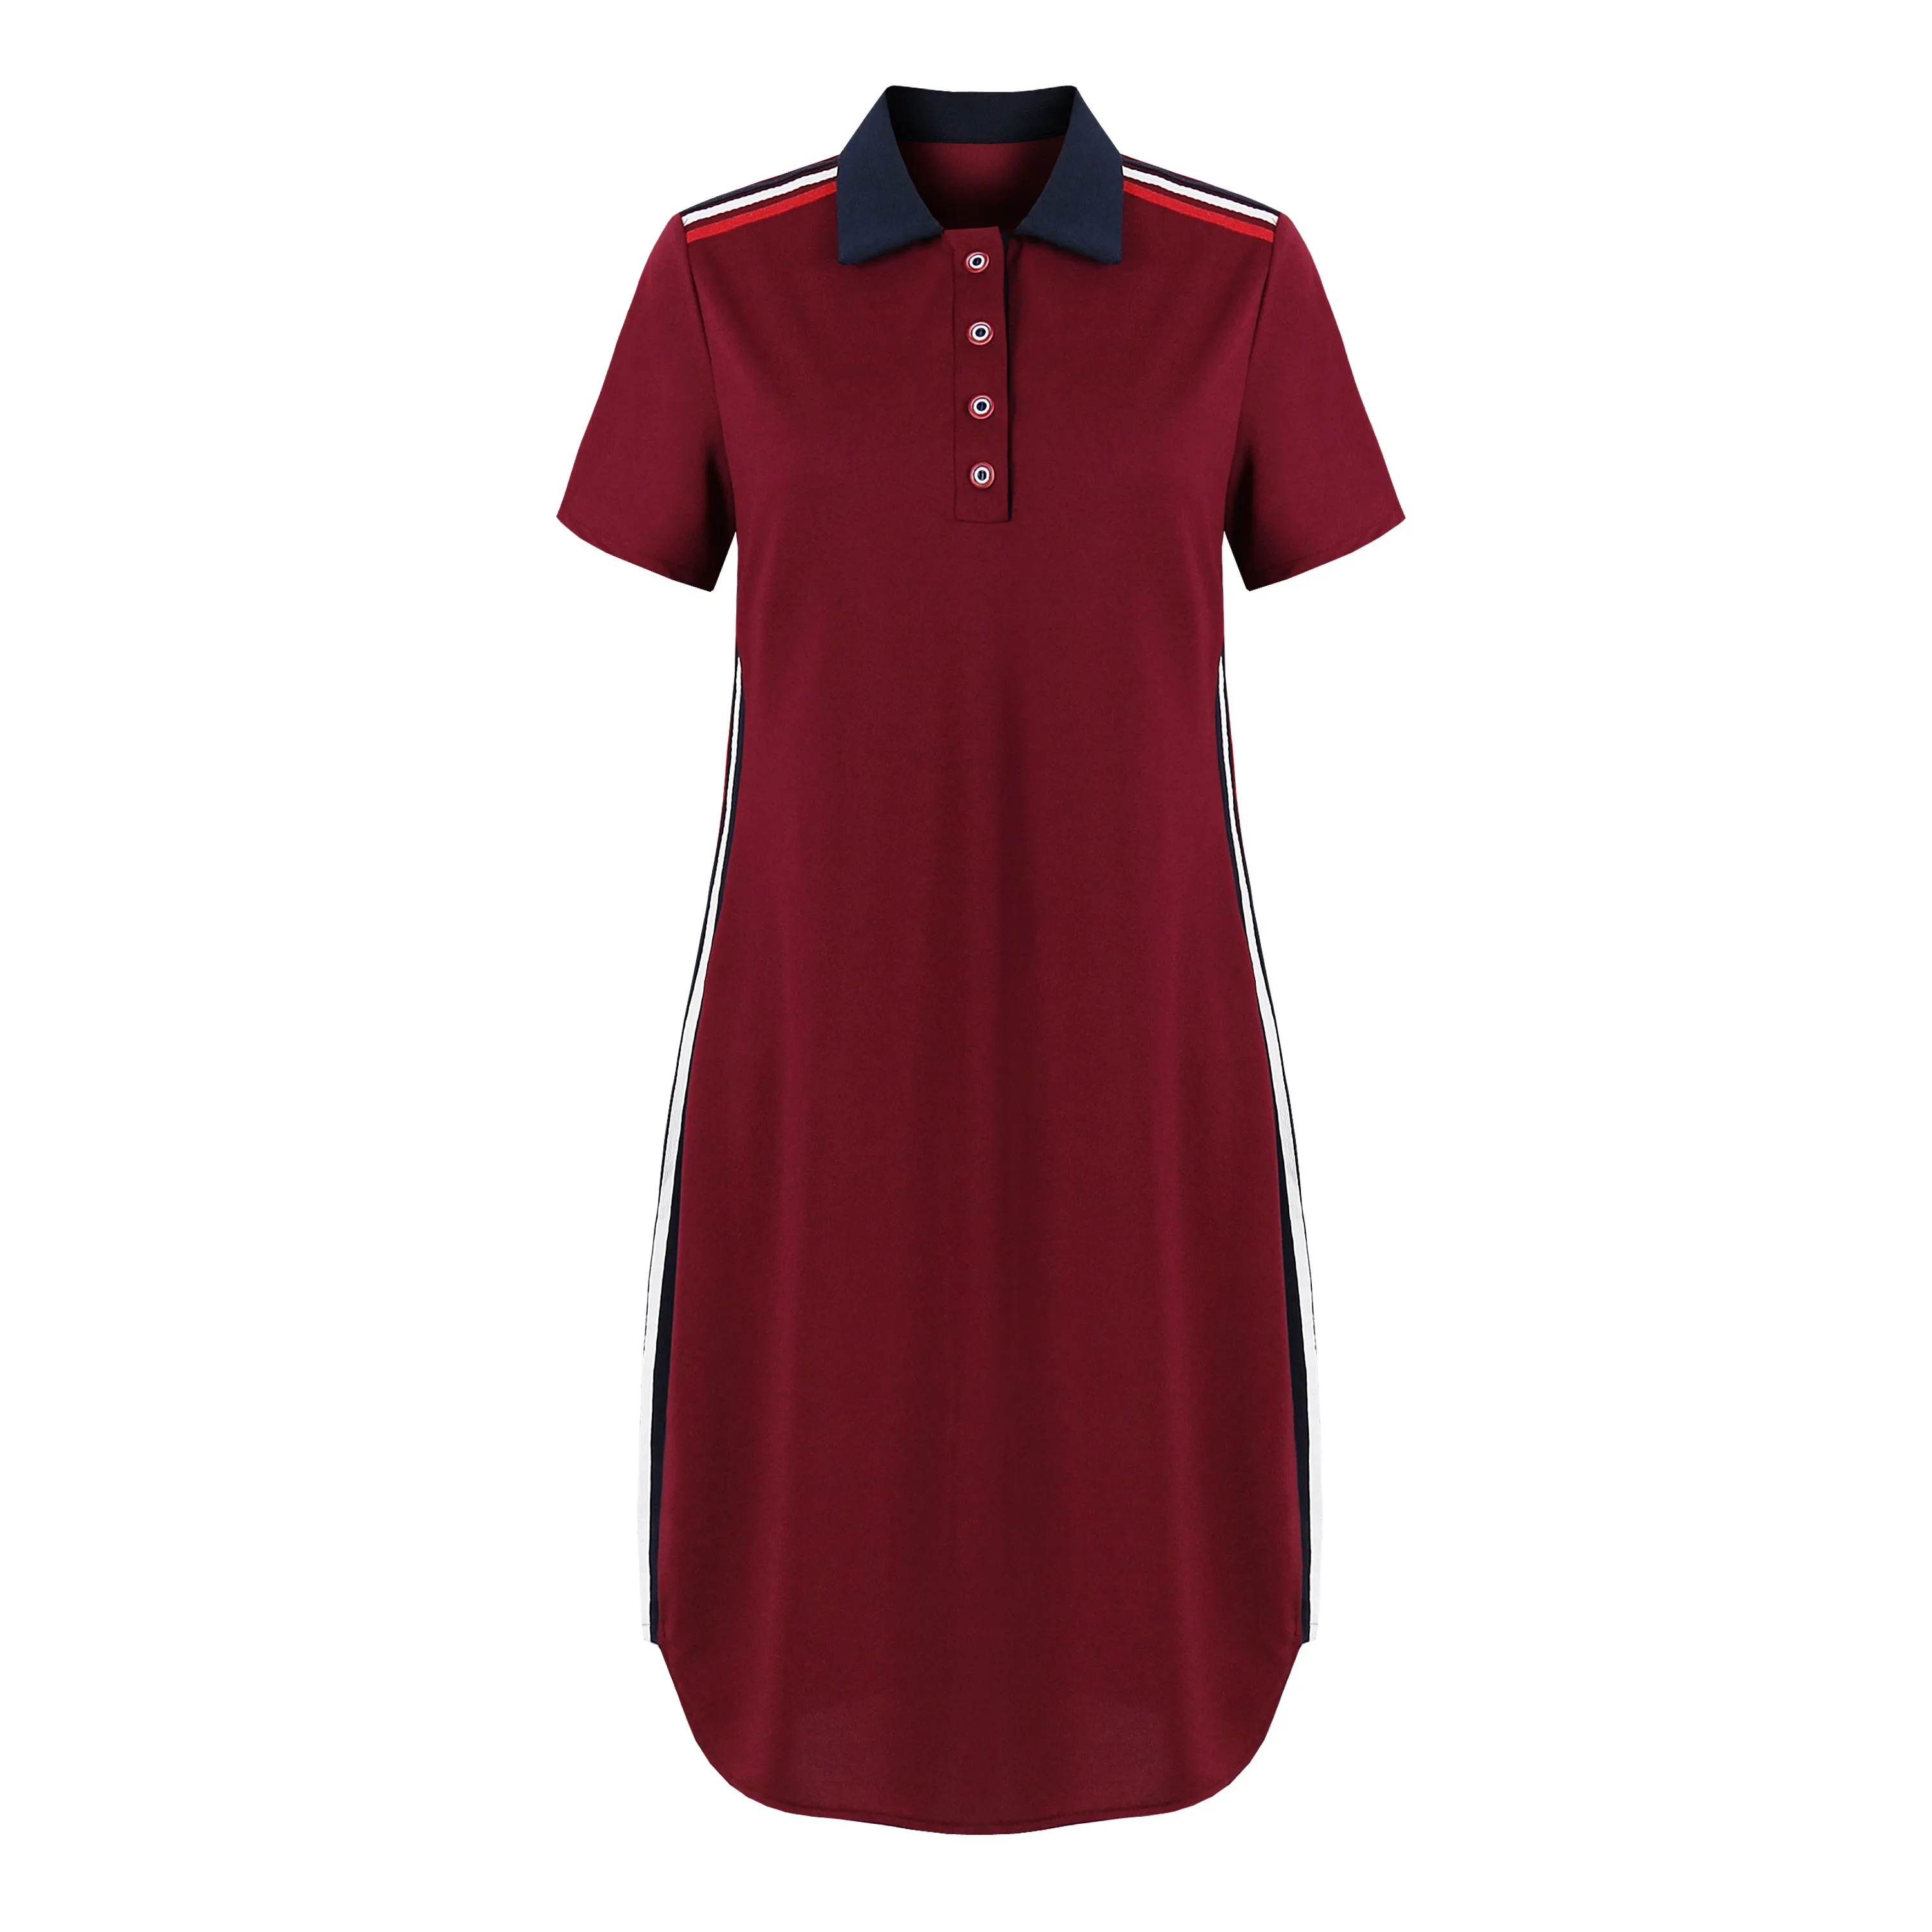 polo dress outfit